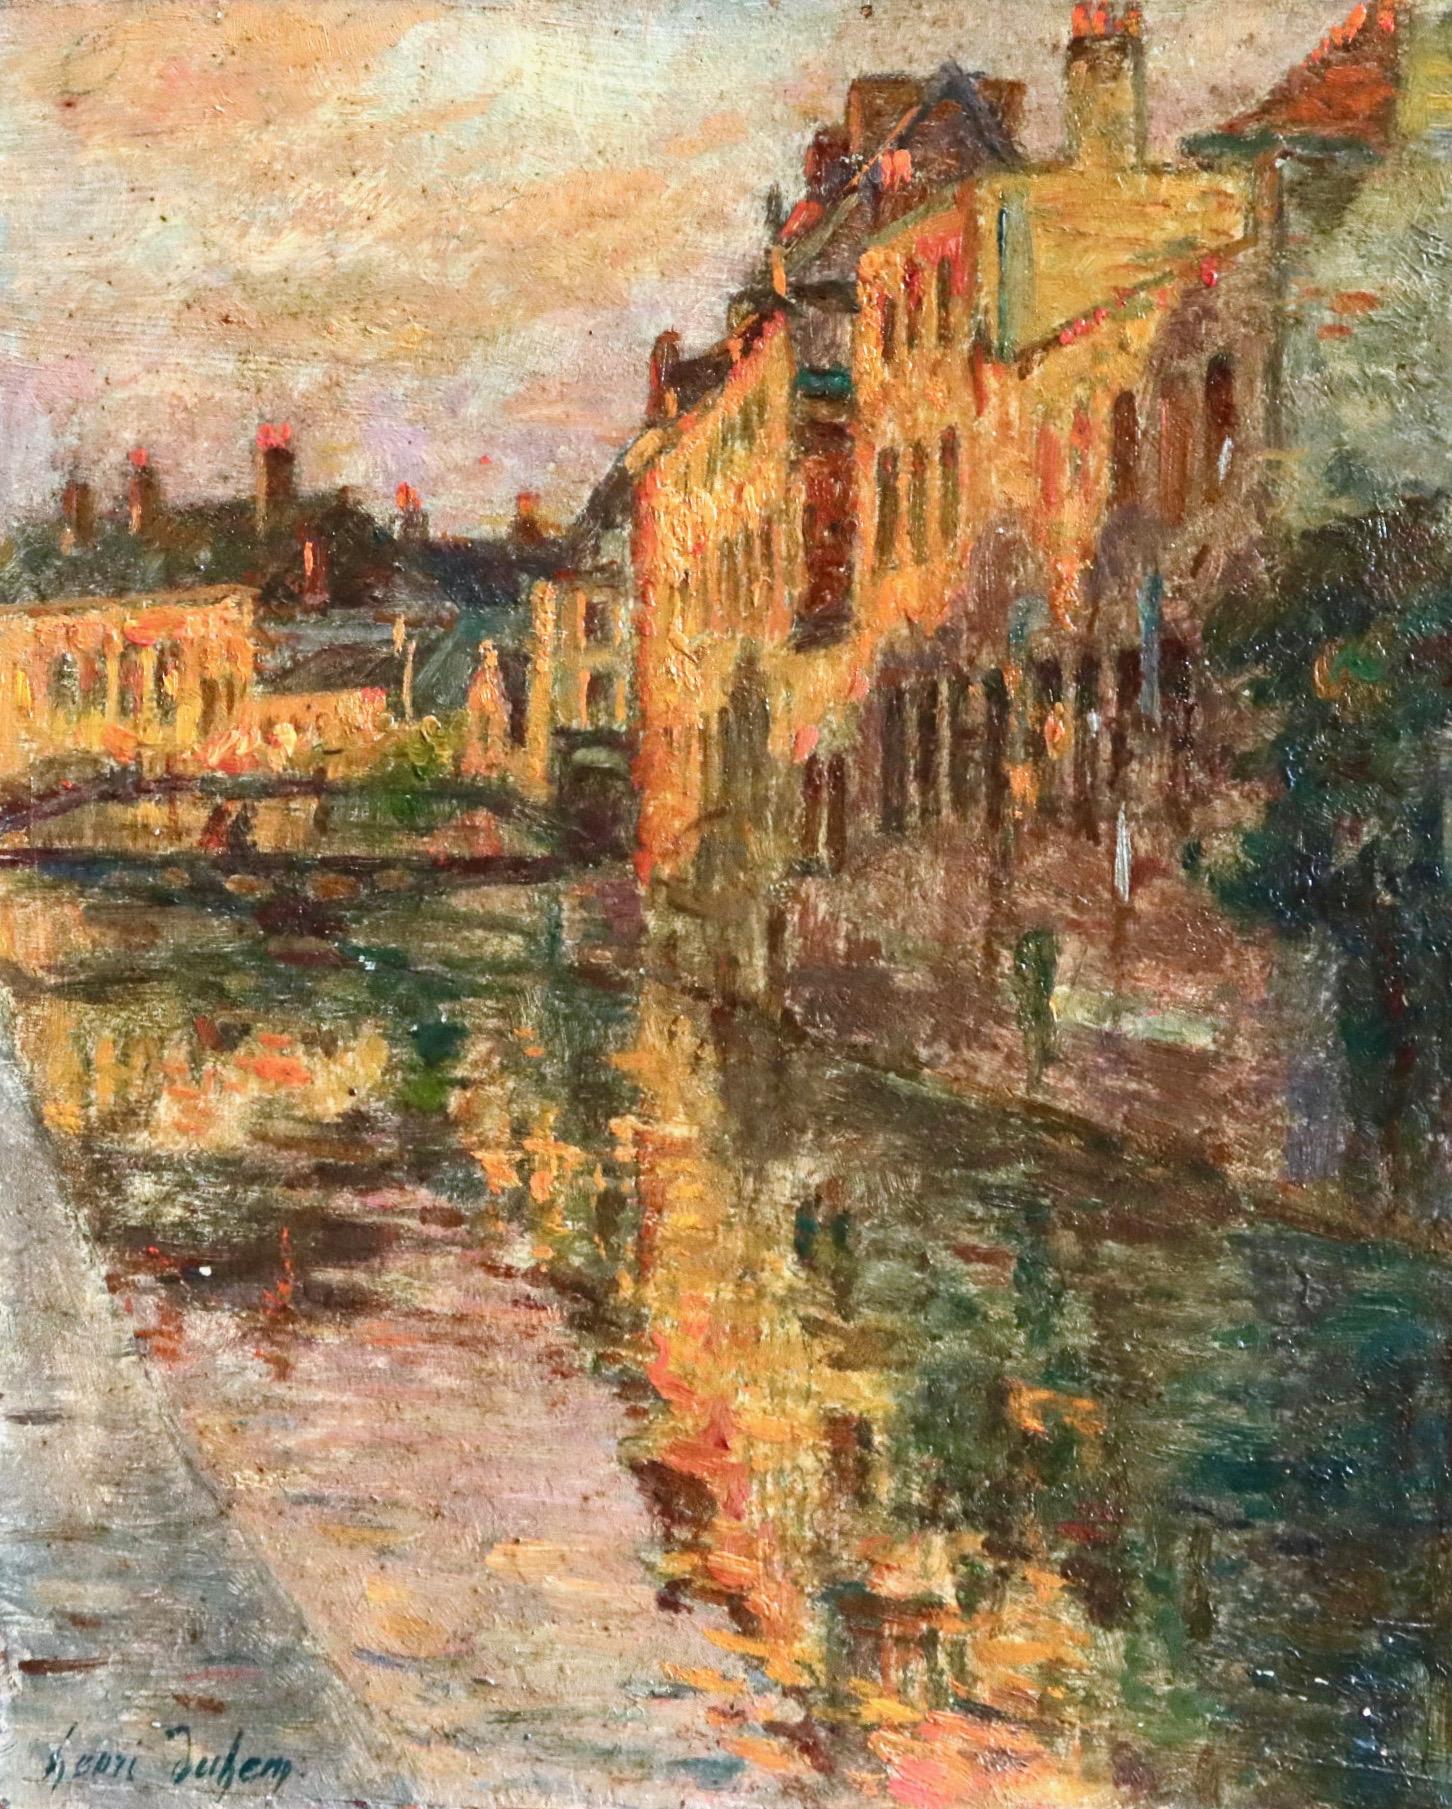 A beautiful painting of Bruges - the buildings on the water's edge being lit up by the setting sun. Oil on panel. Signed lower left and dated 1918 verso. This painting is not currently framed but a suitable frame can be sourced if